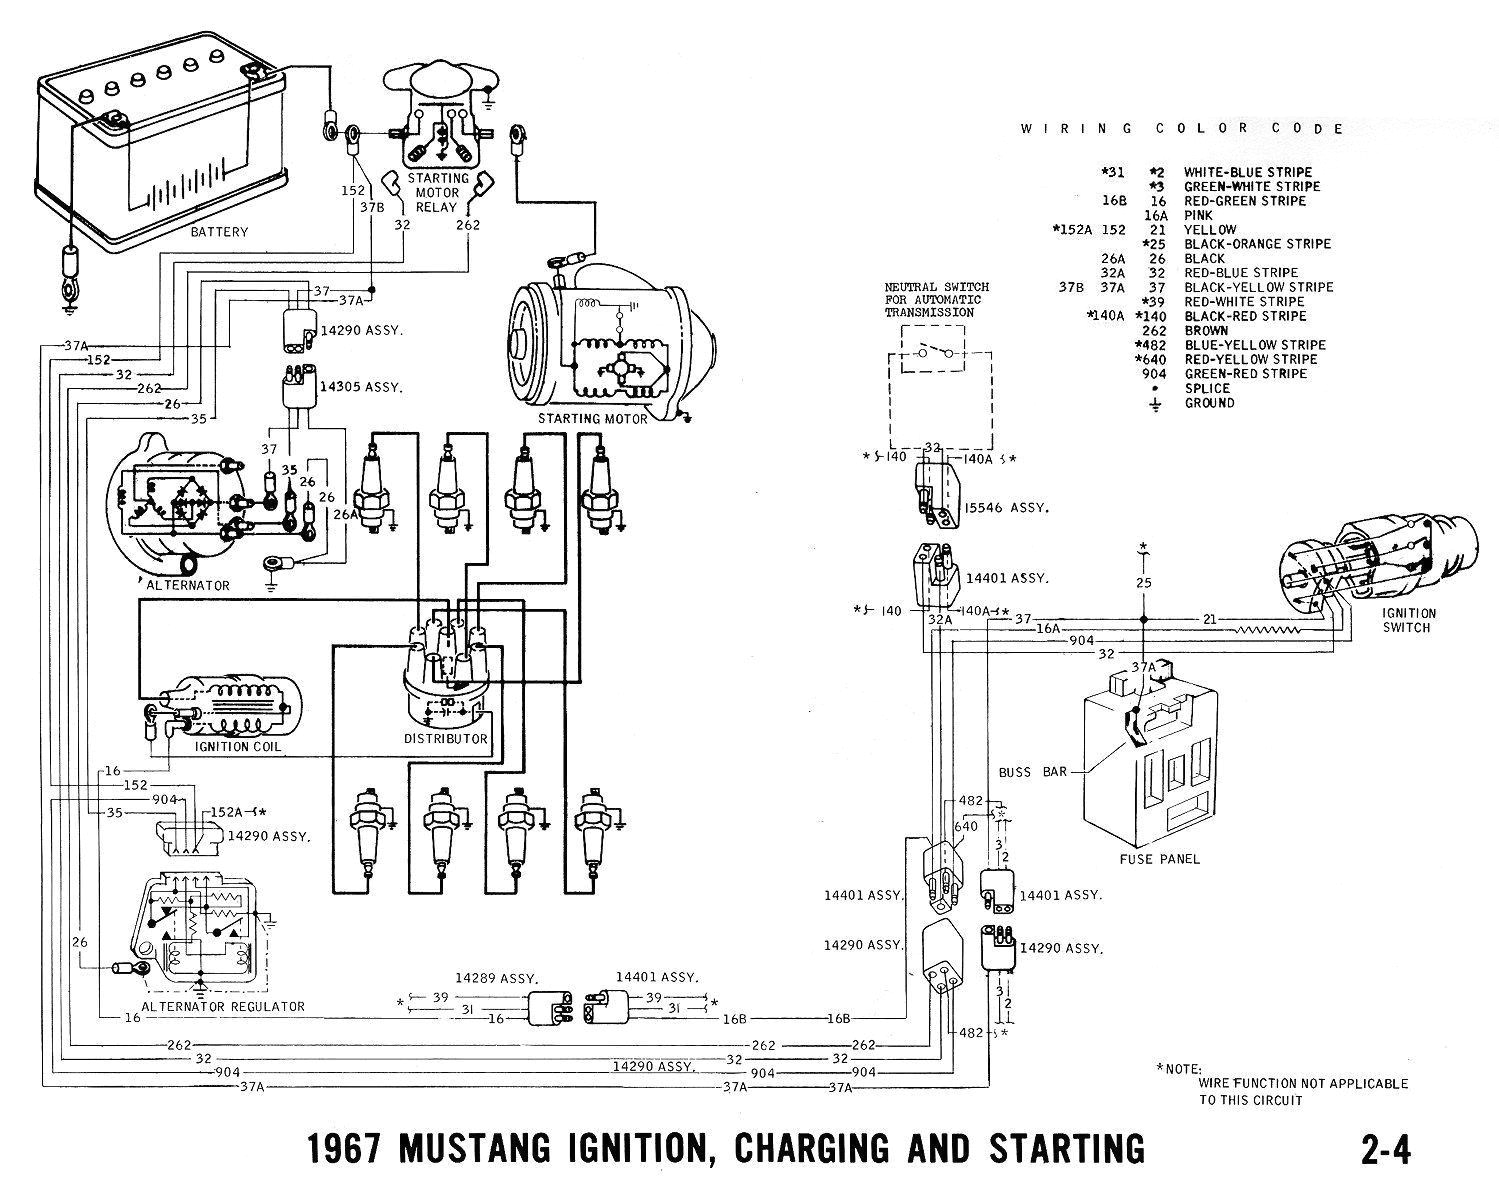 1964 ford mustang wiring diagram home wiring diagram 1964 ford mustang wiring diagram wiring diagram 1964